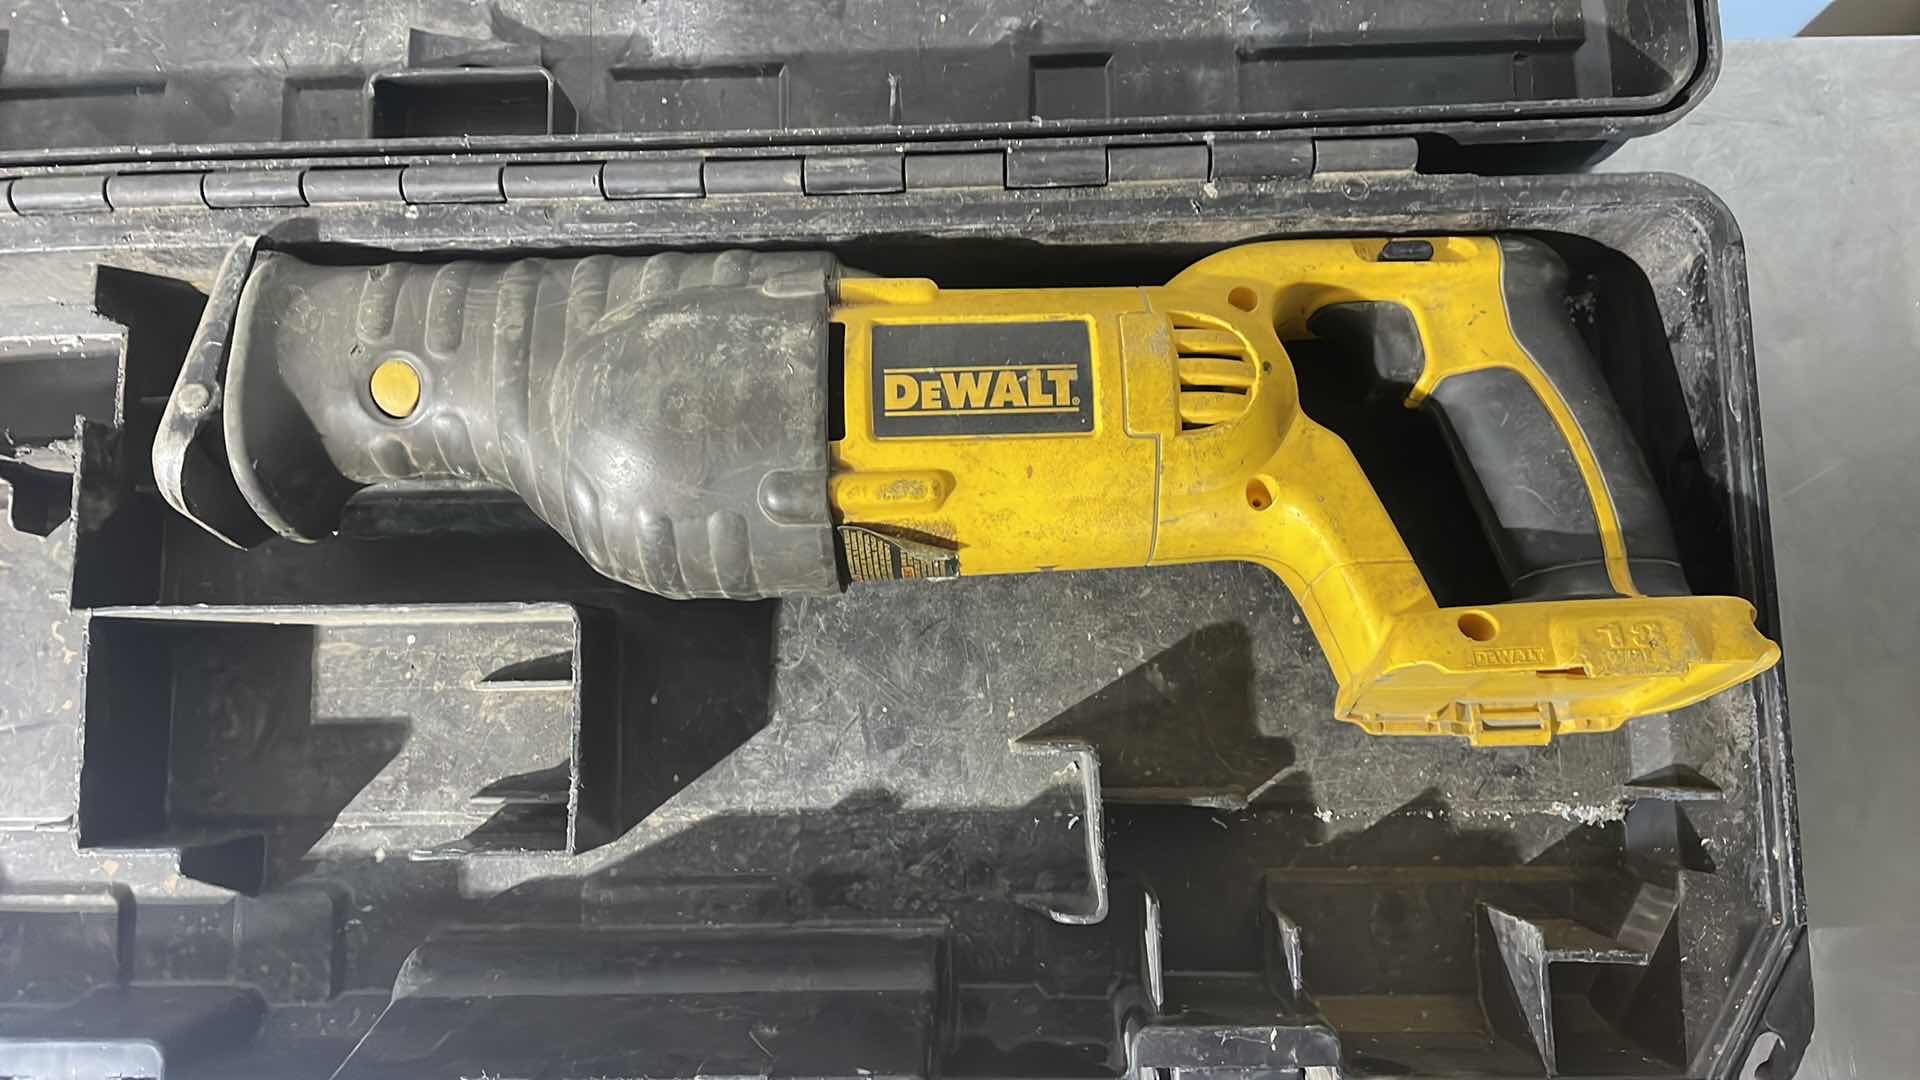 Photo 2 of DEWALT DC385 18V VARIABLE SPEED RECIPROCATING SAW IN CASE NO BATTERY TESTED WORKING